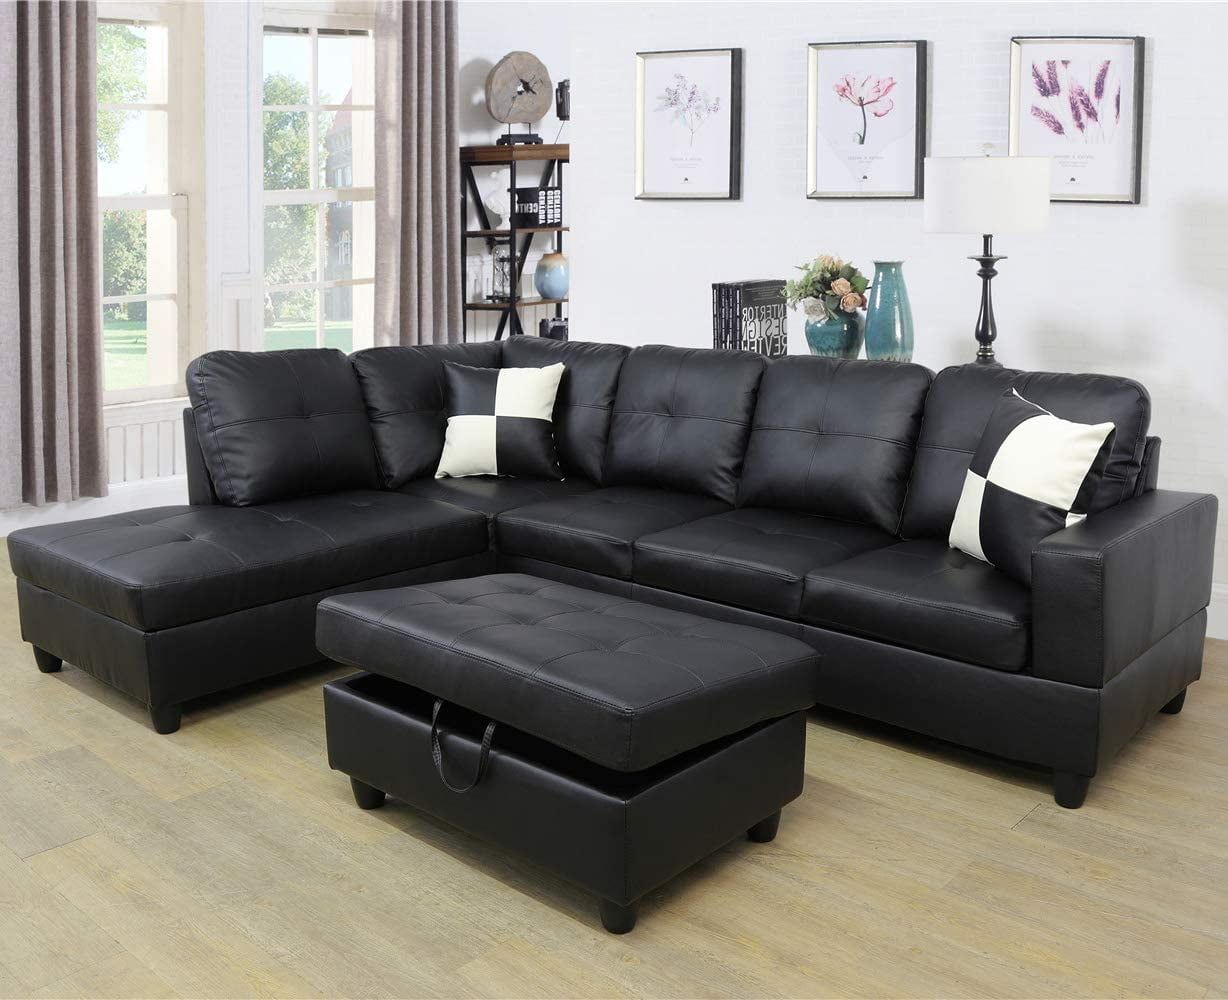 Gcf Faux Leather 3 Piece Sectional Sofa Couch Set, L Shaped Modern Sofa  With Chaise Storage Ottoman And Pillows For Living Room Furniture, Left  Hand Facing Sectional Sofa Set Black – Walmart For 3 Piece Leather Sectional Sofa Sets (Photo 2 of 15)